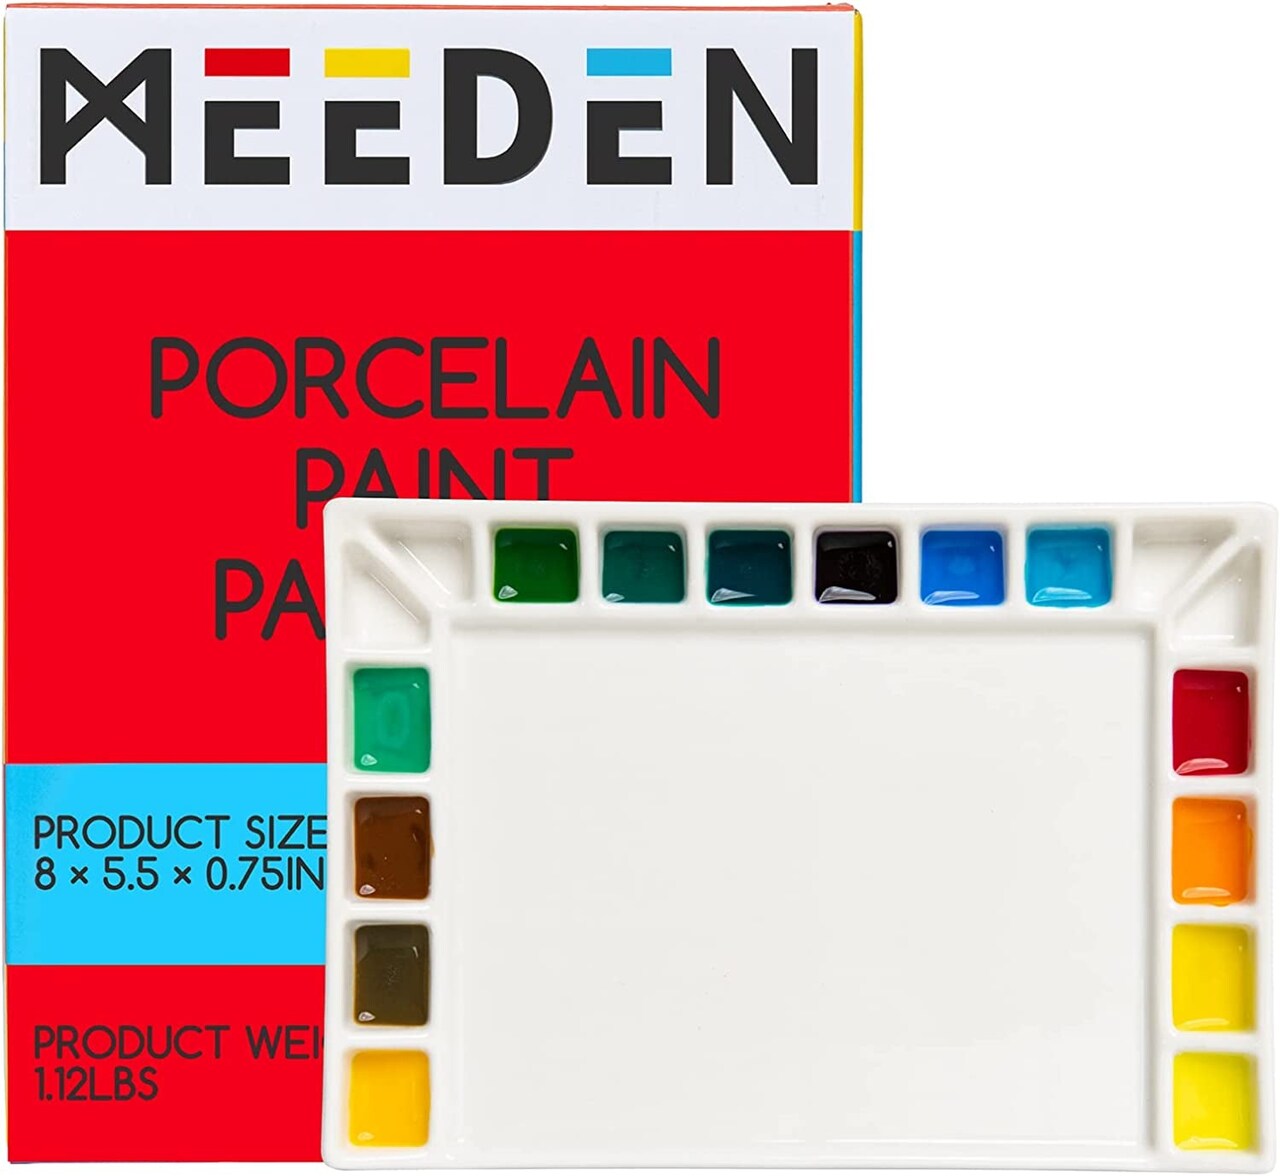 18-Well Porcelain Artist Paint Palette, Mixing Art Ceramic Watercolor Paint  Palette for Watercolor Gouache Acrylic Oil Painting, Rectangle 8 by  5-1/2-Inch